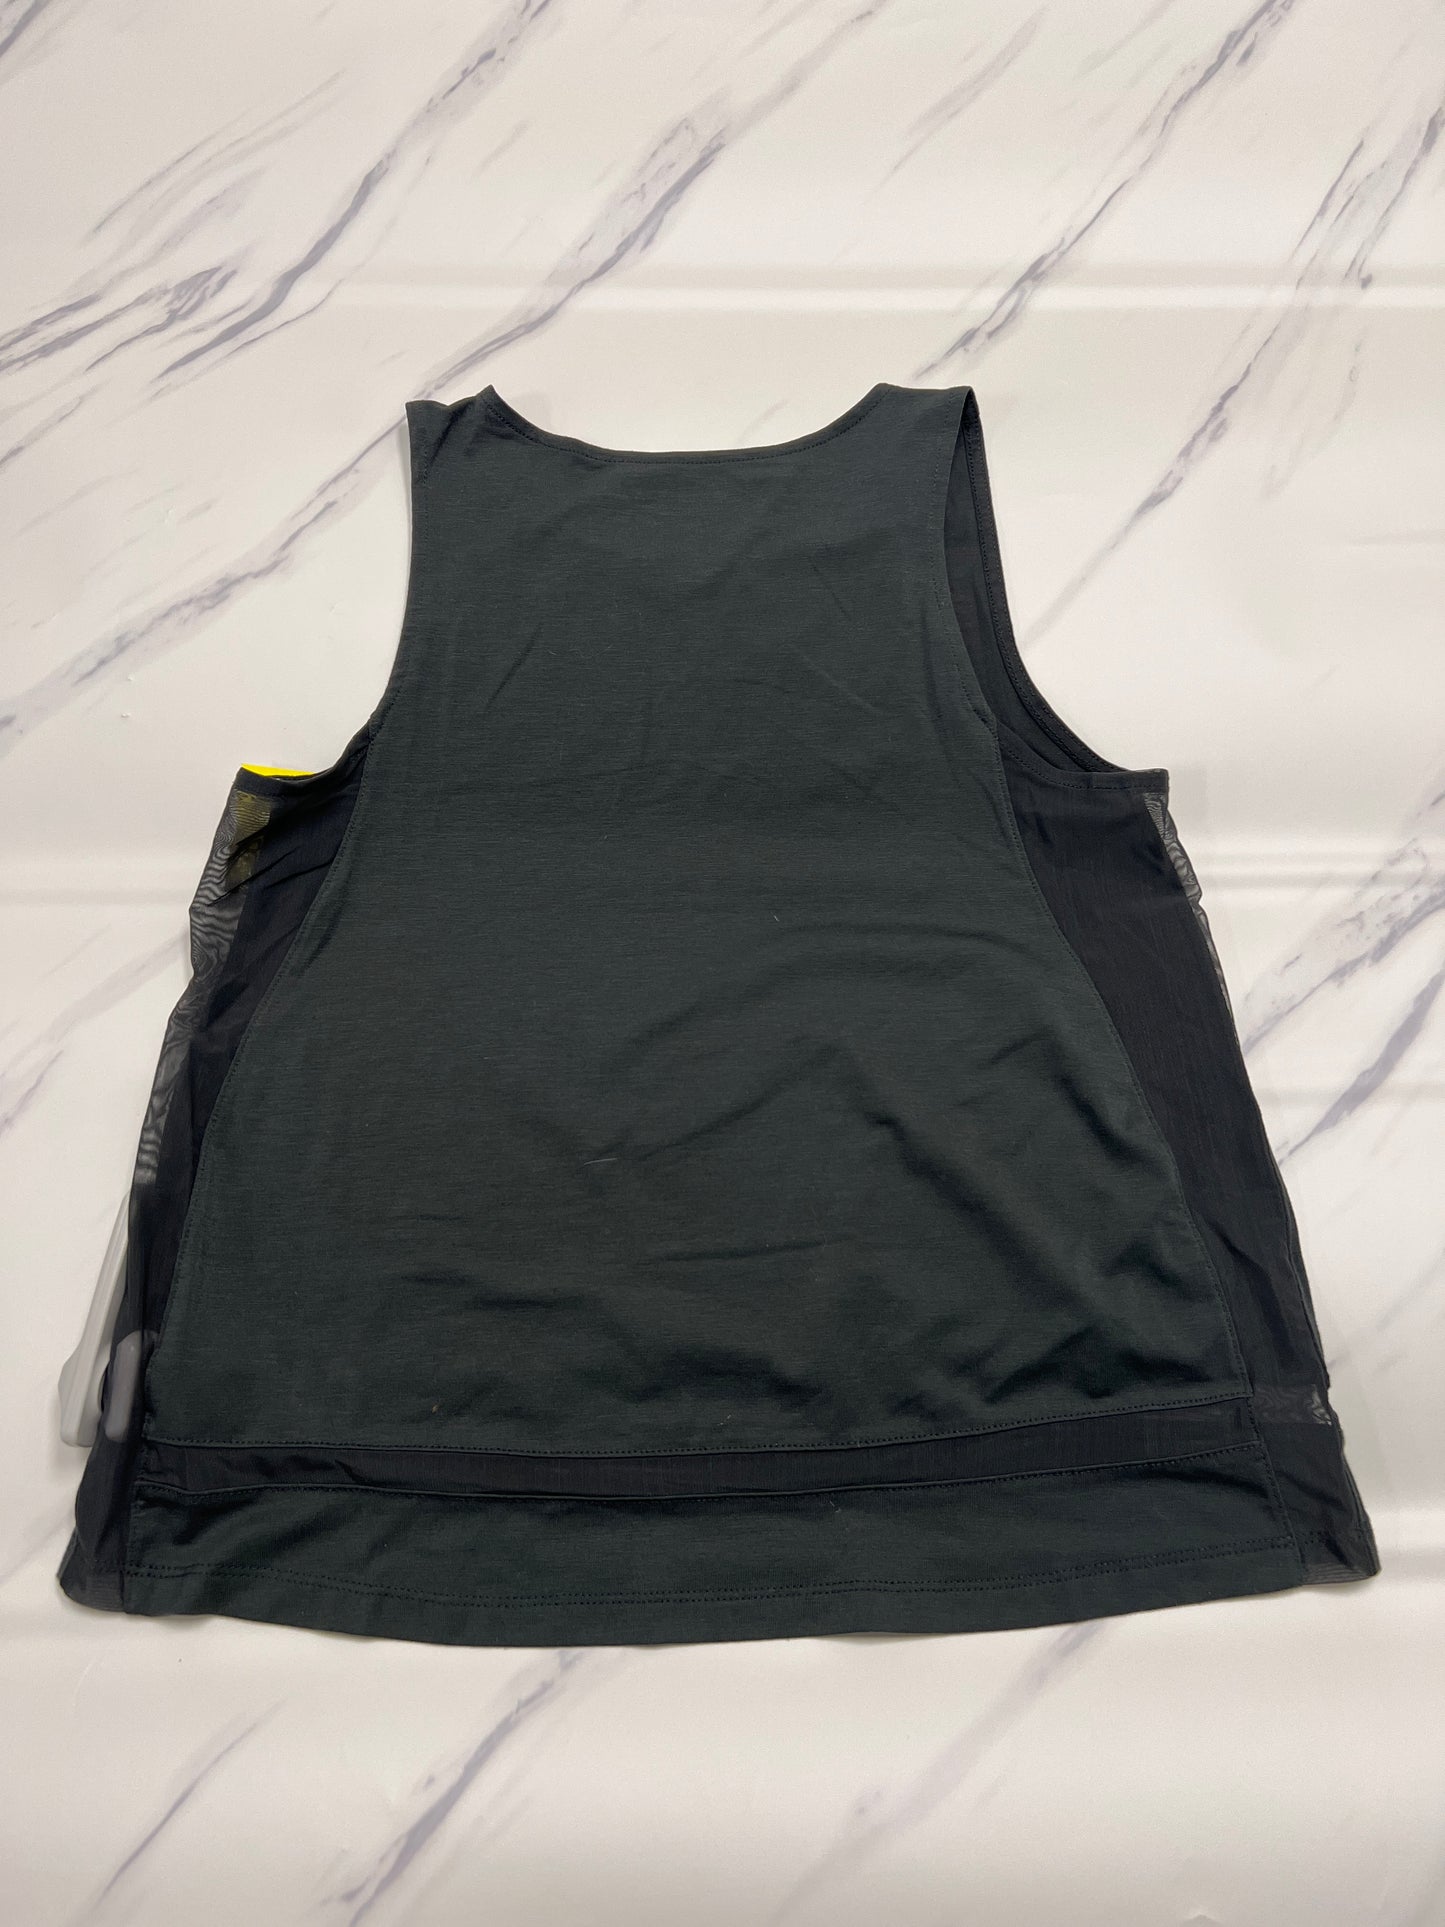 Athletic Tank Top By Athleta  Size: Xs